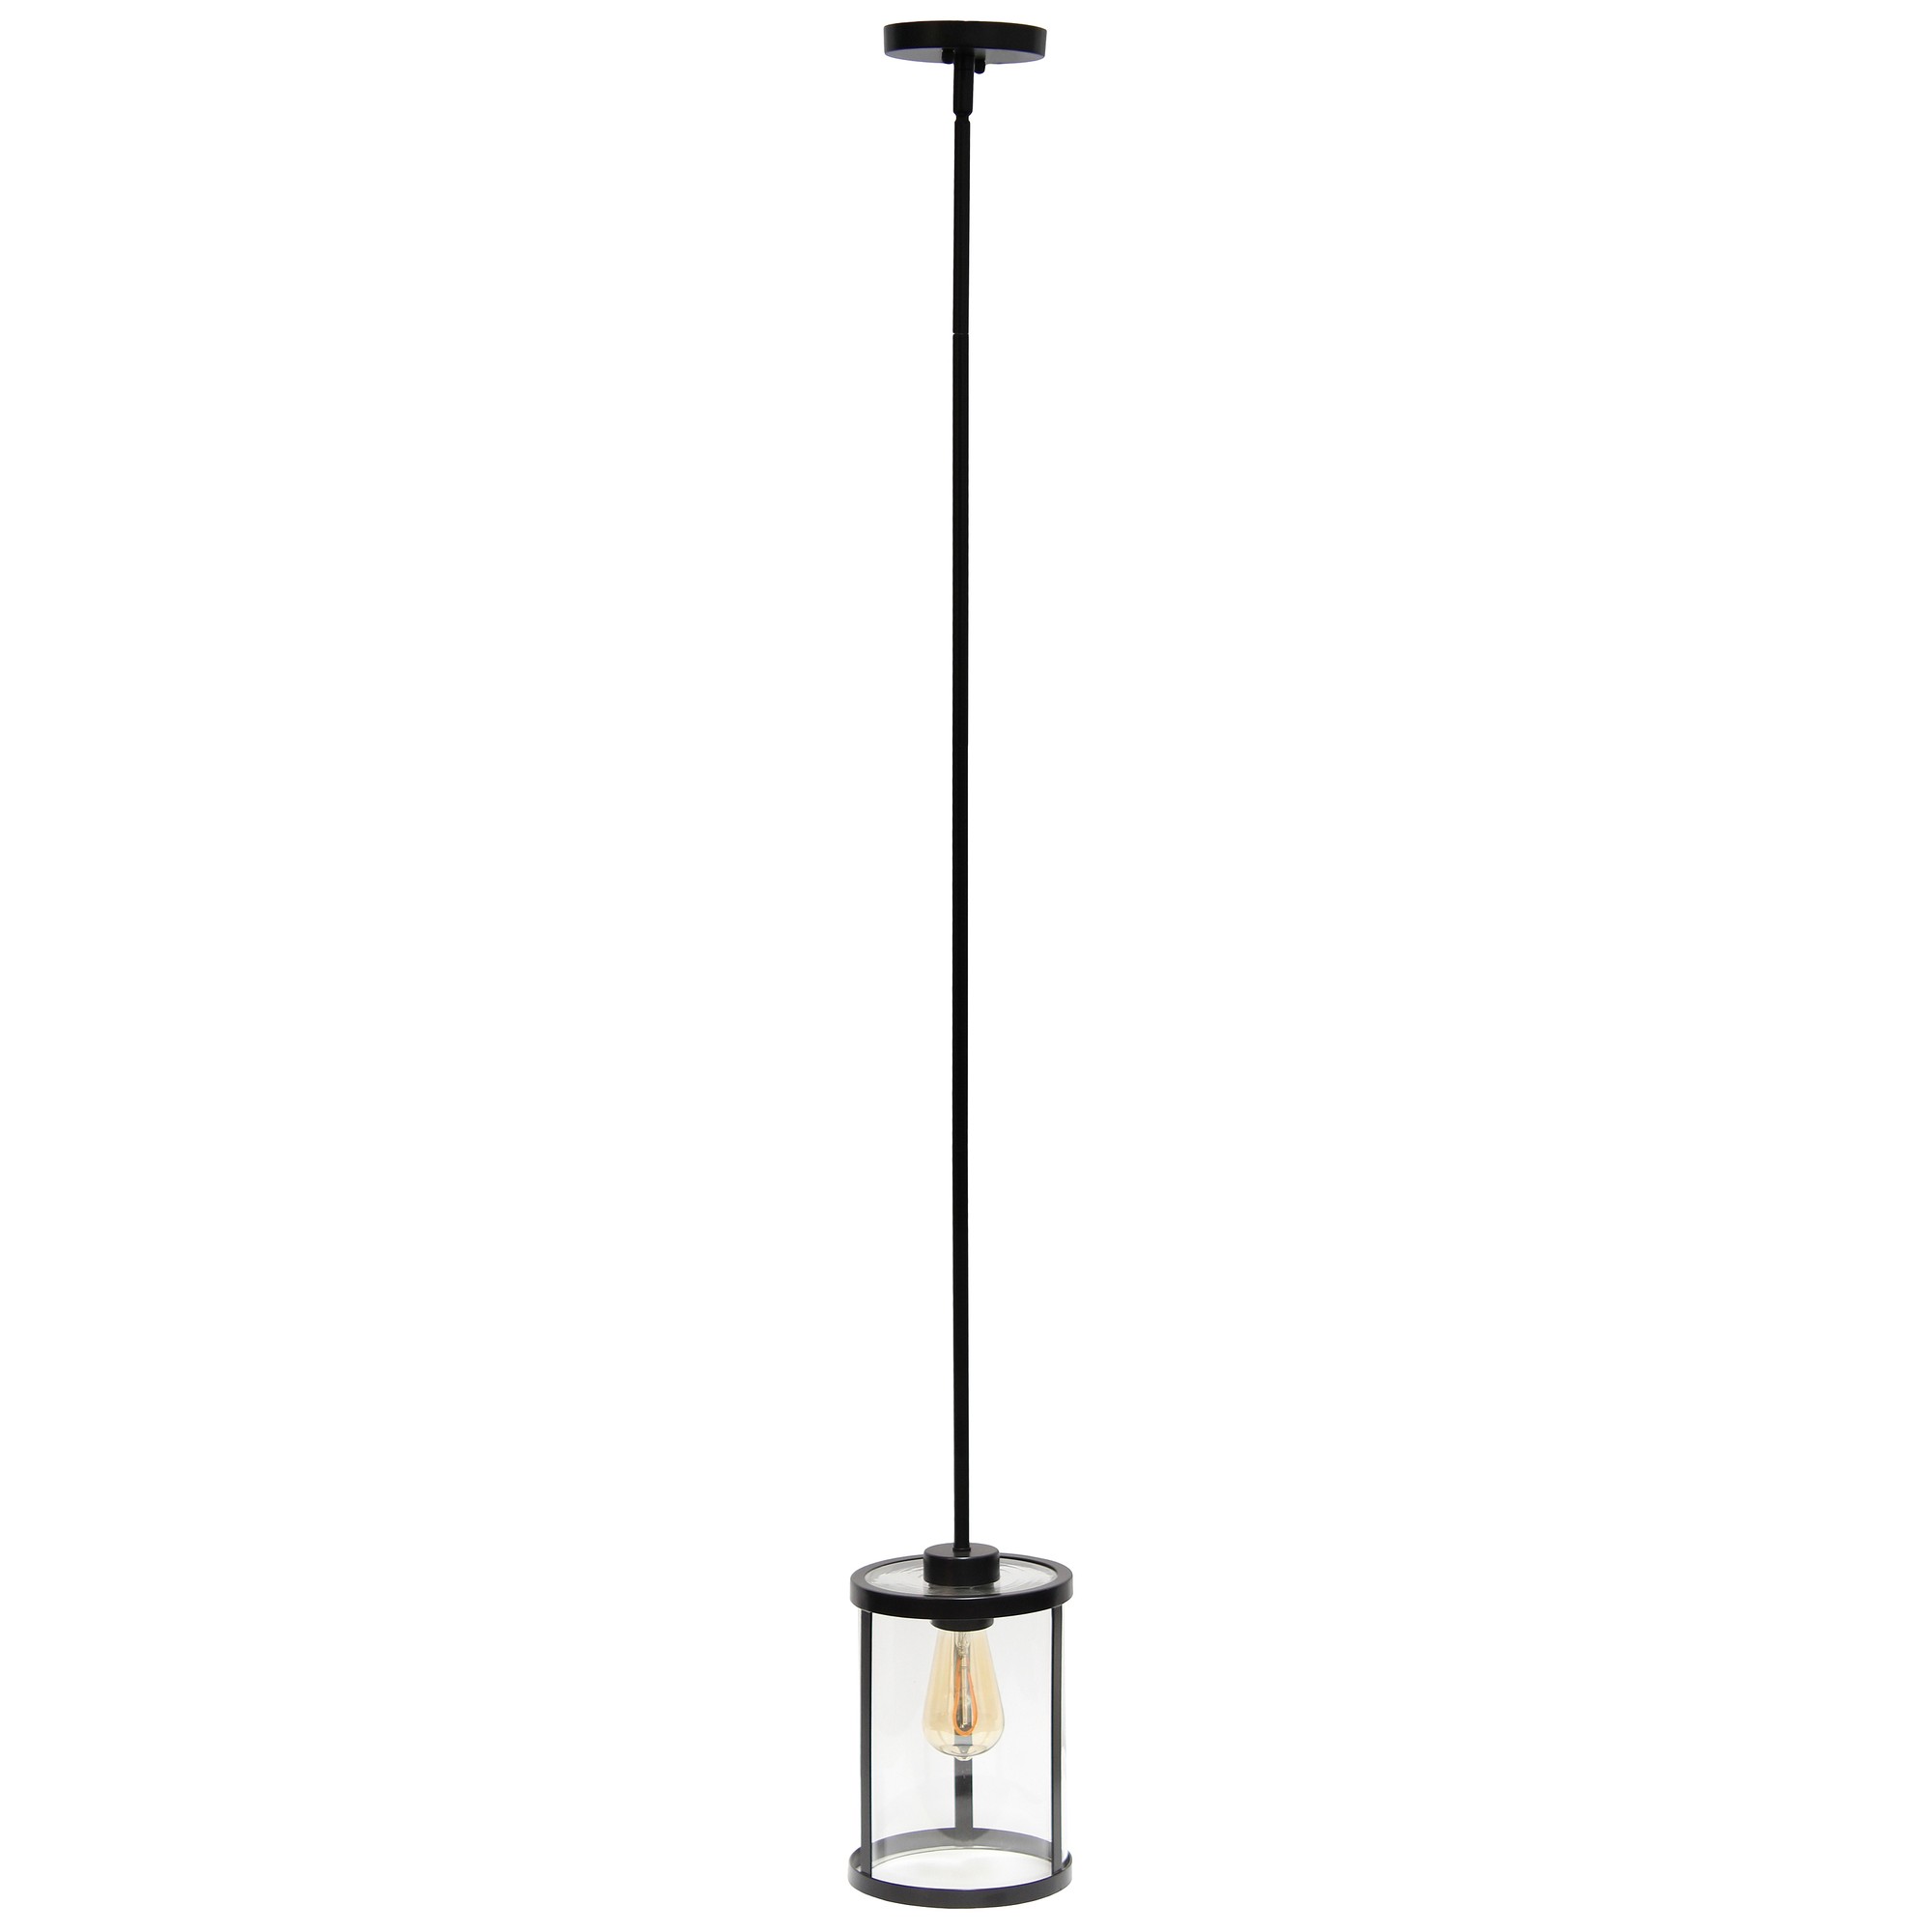 Lalia Home 1-Light 9.25" Modern Adjustable Hanging Cylindrical Clear Glass Pendant Fixture with Metal Accents, Black